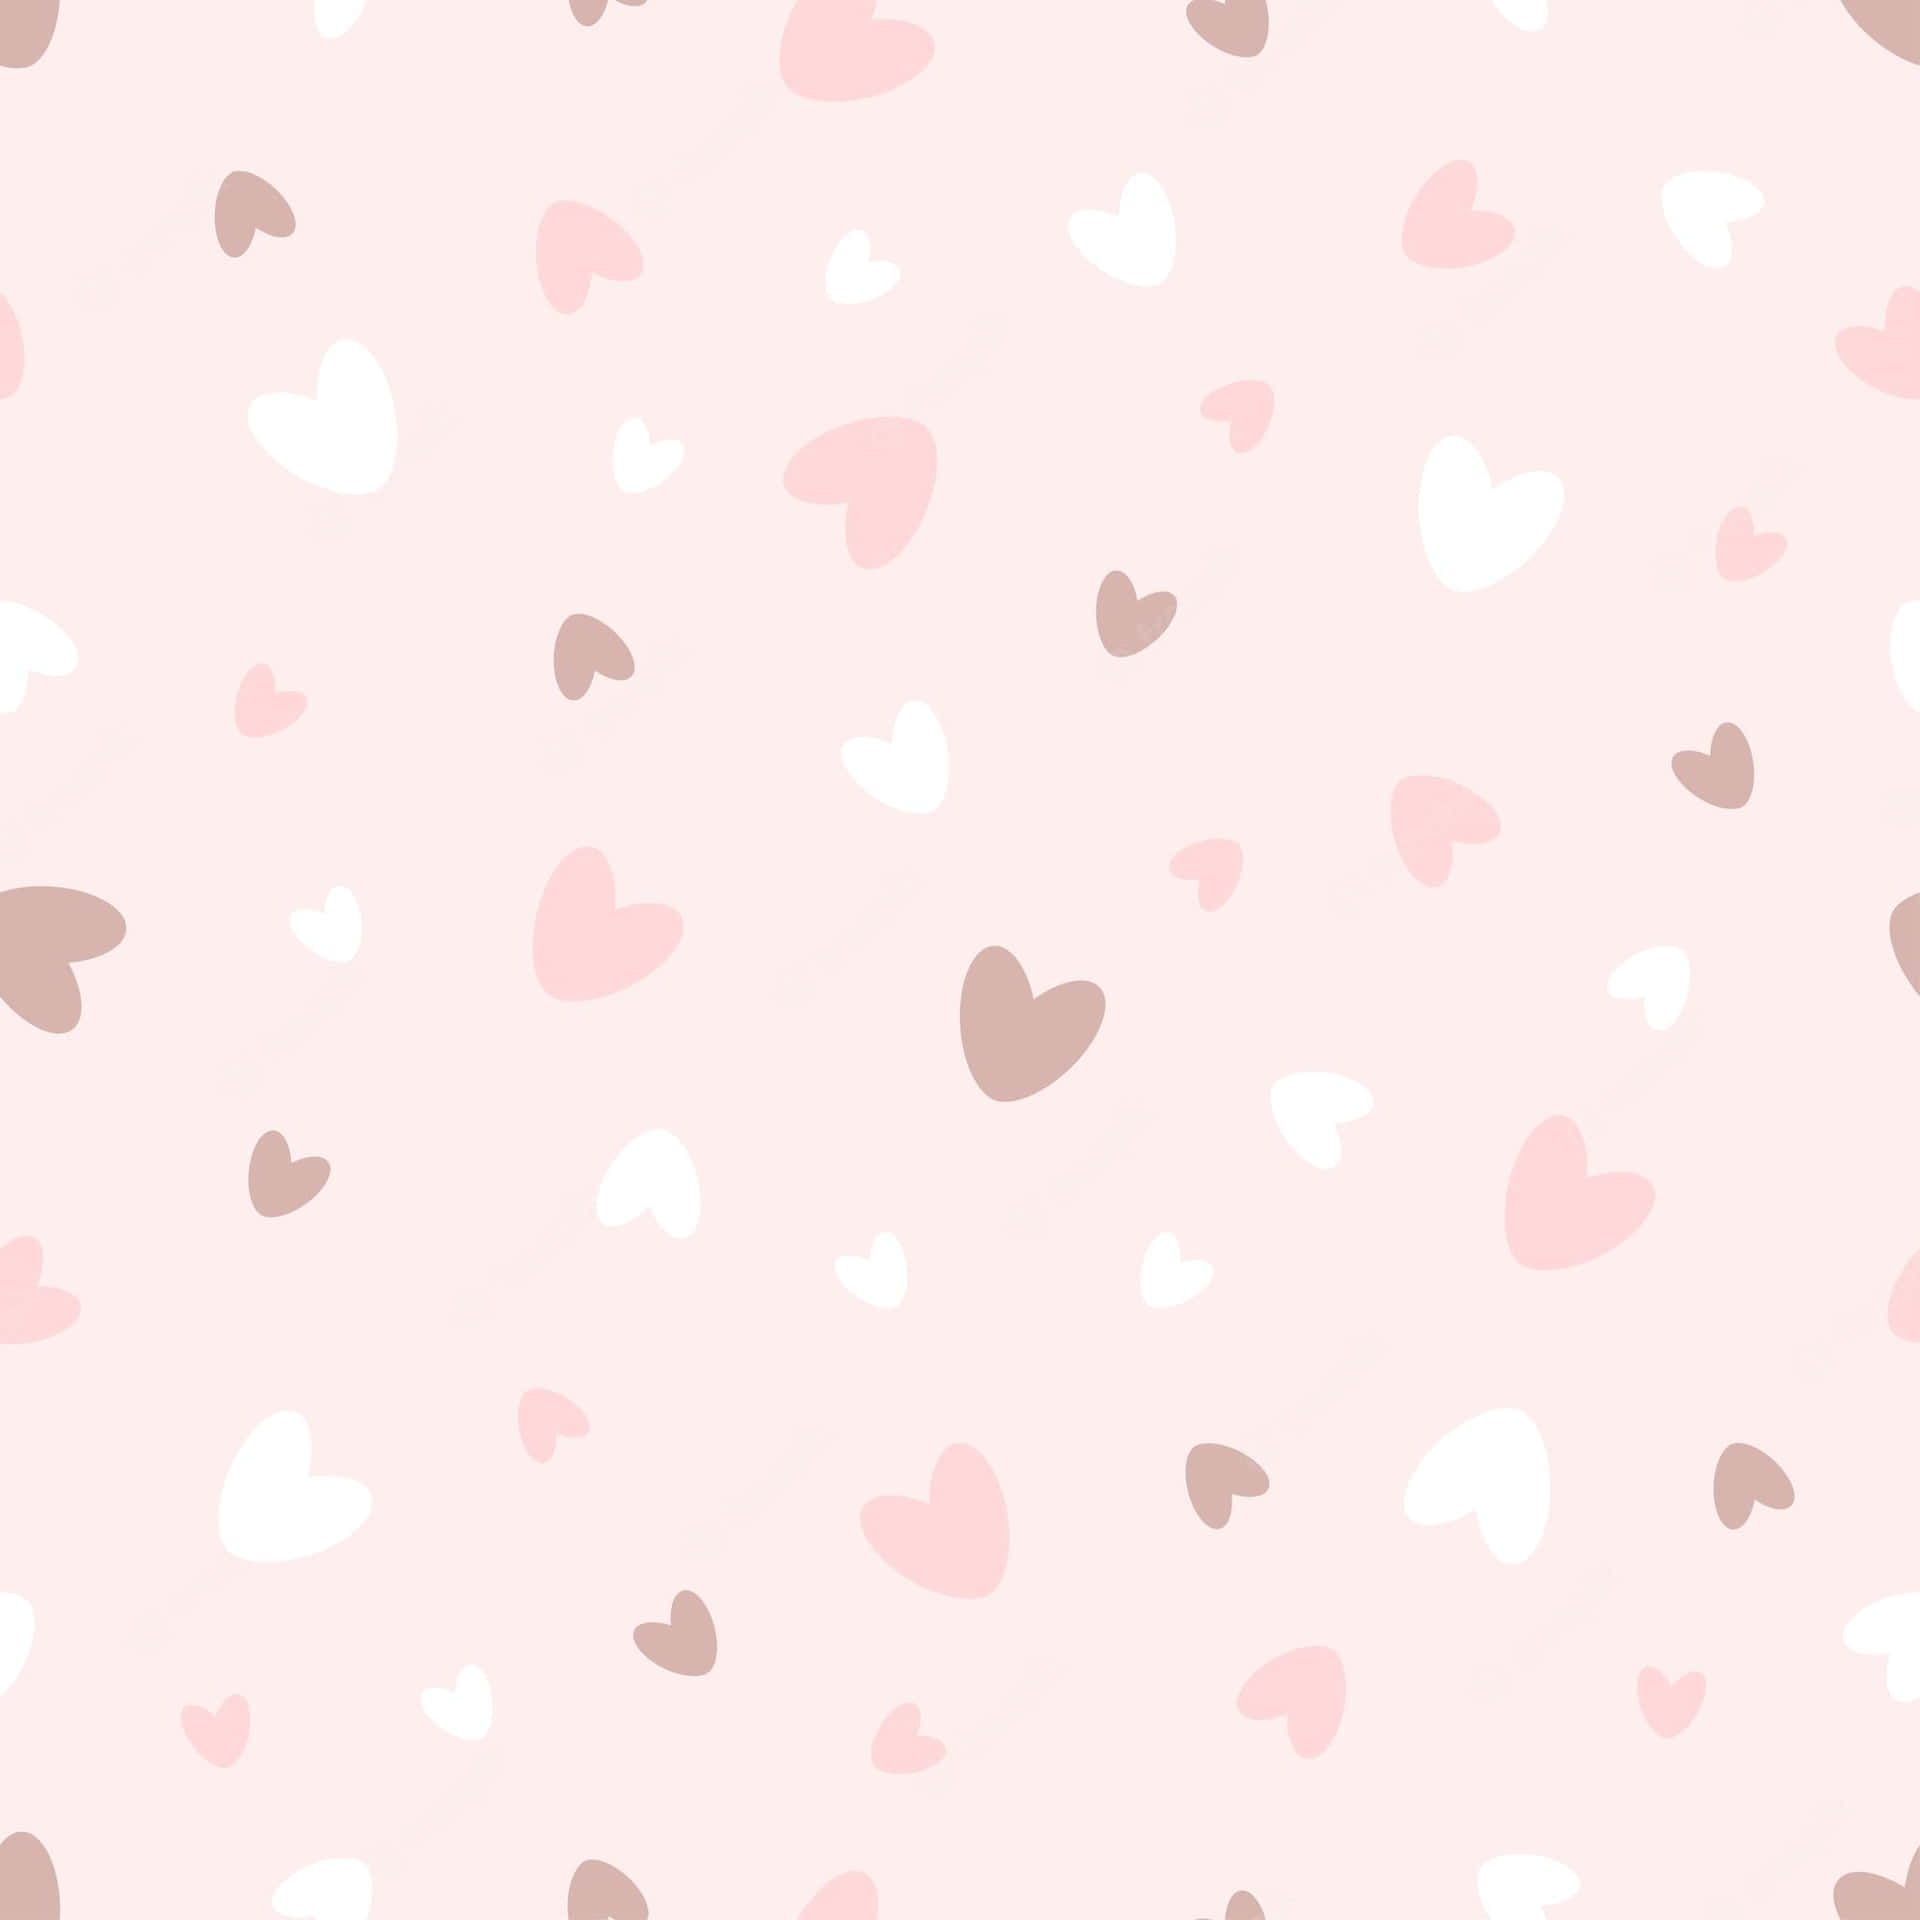 Vibrant Pink Heart Background